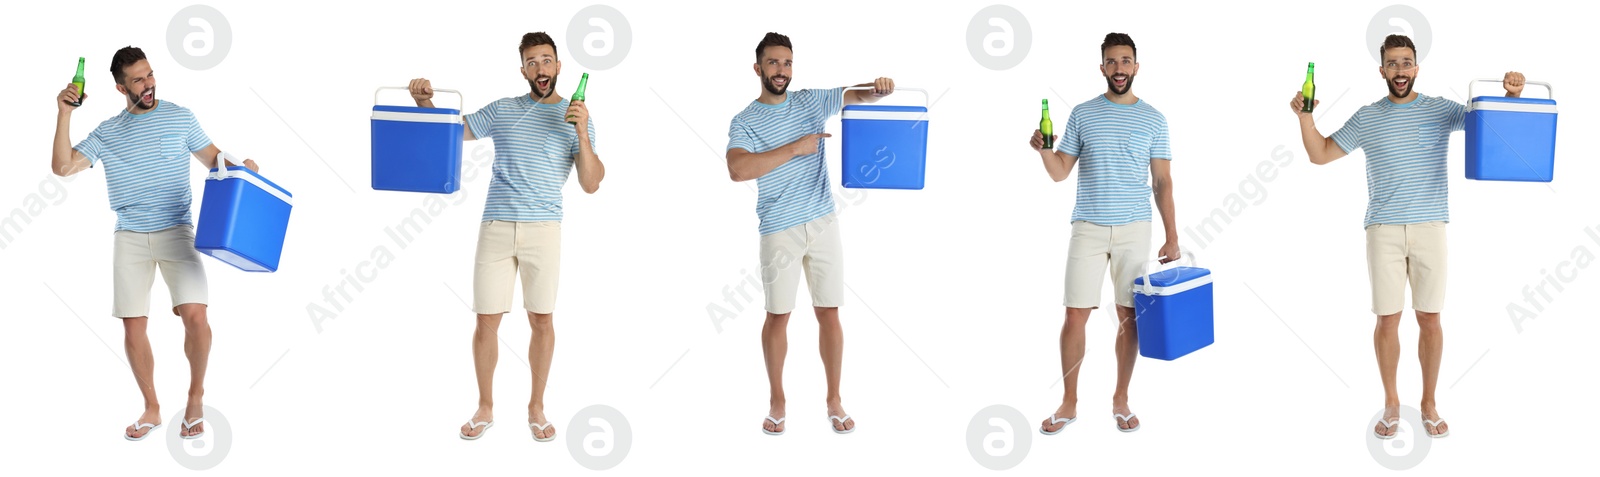 Image of Collage with photos of man holding cool boxes on white background. Banner design